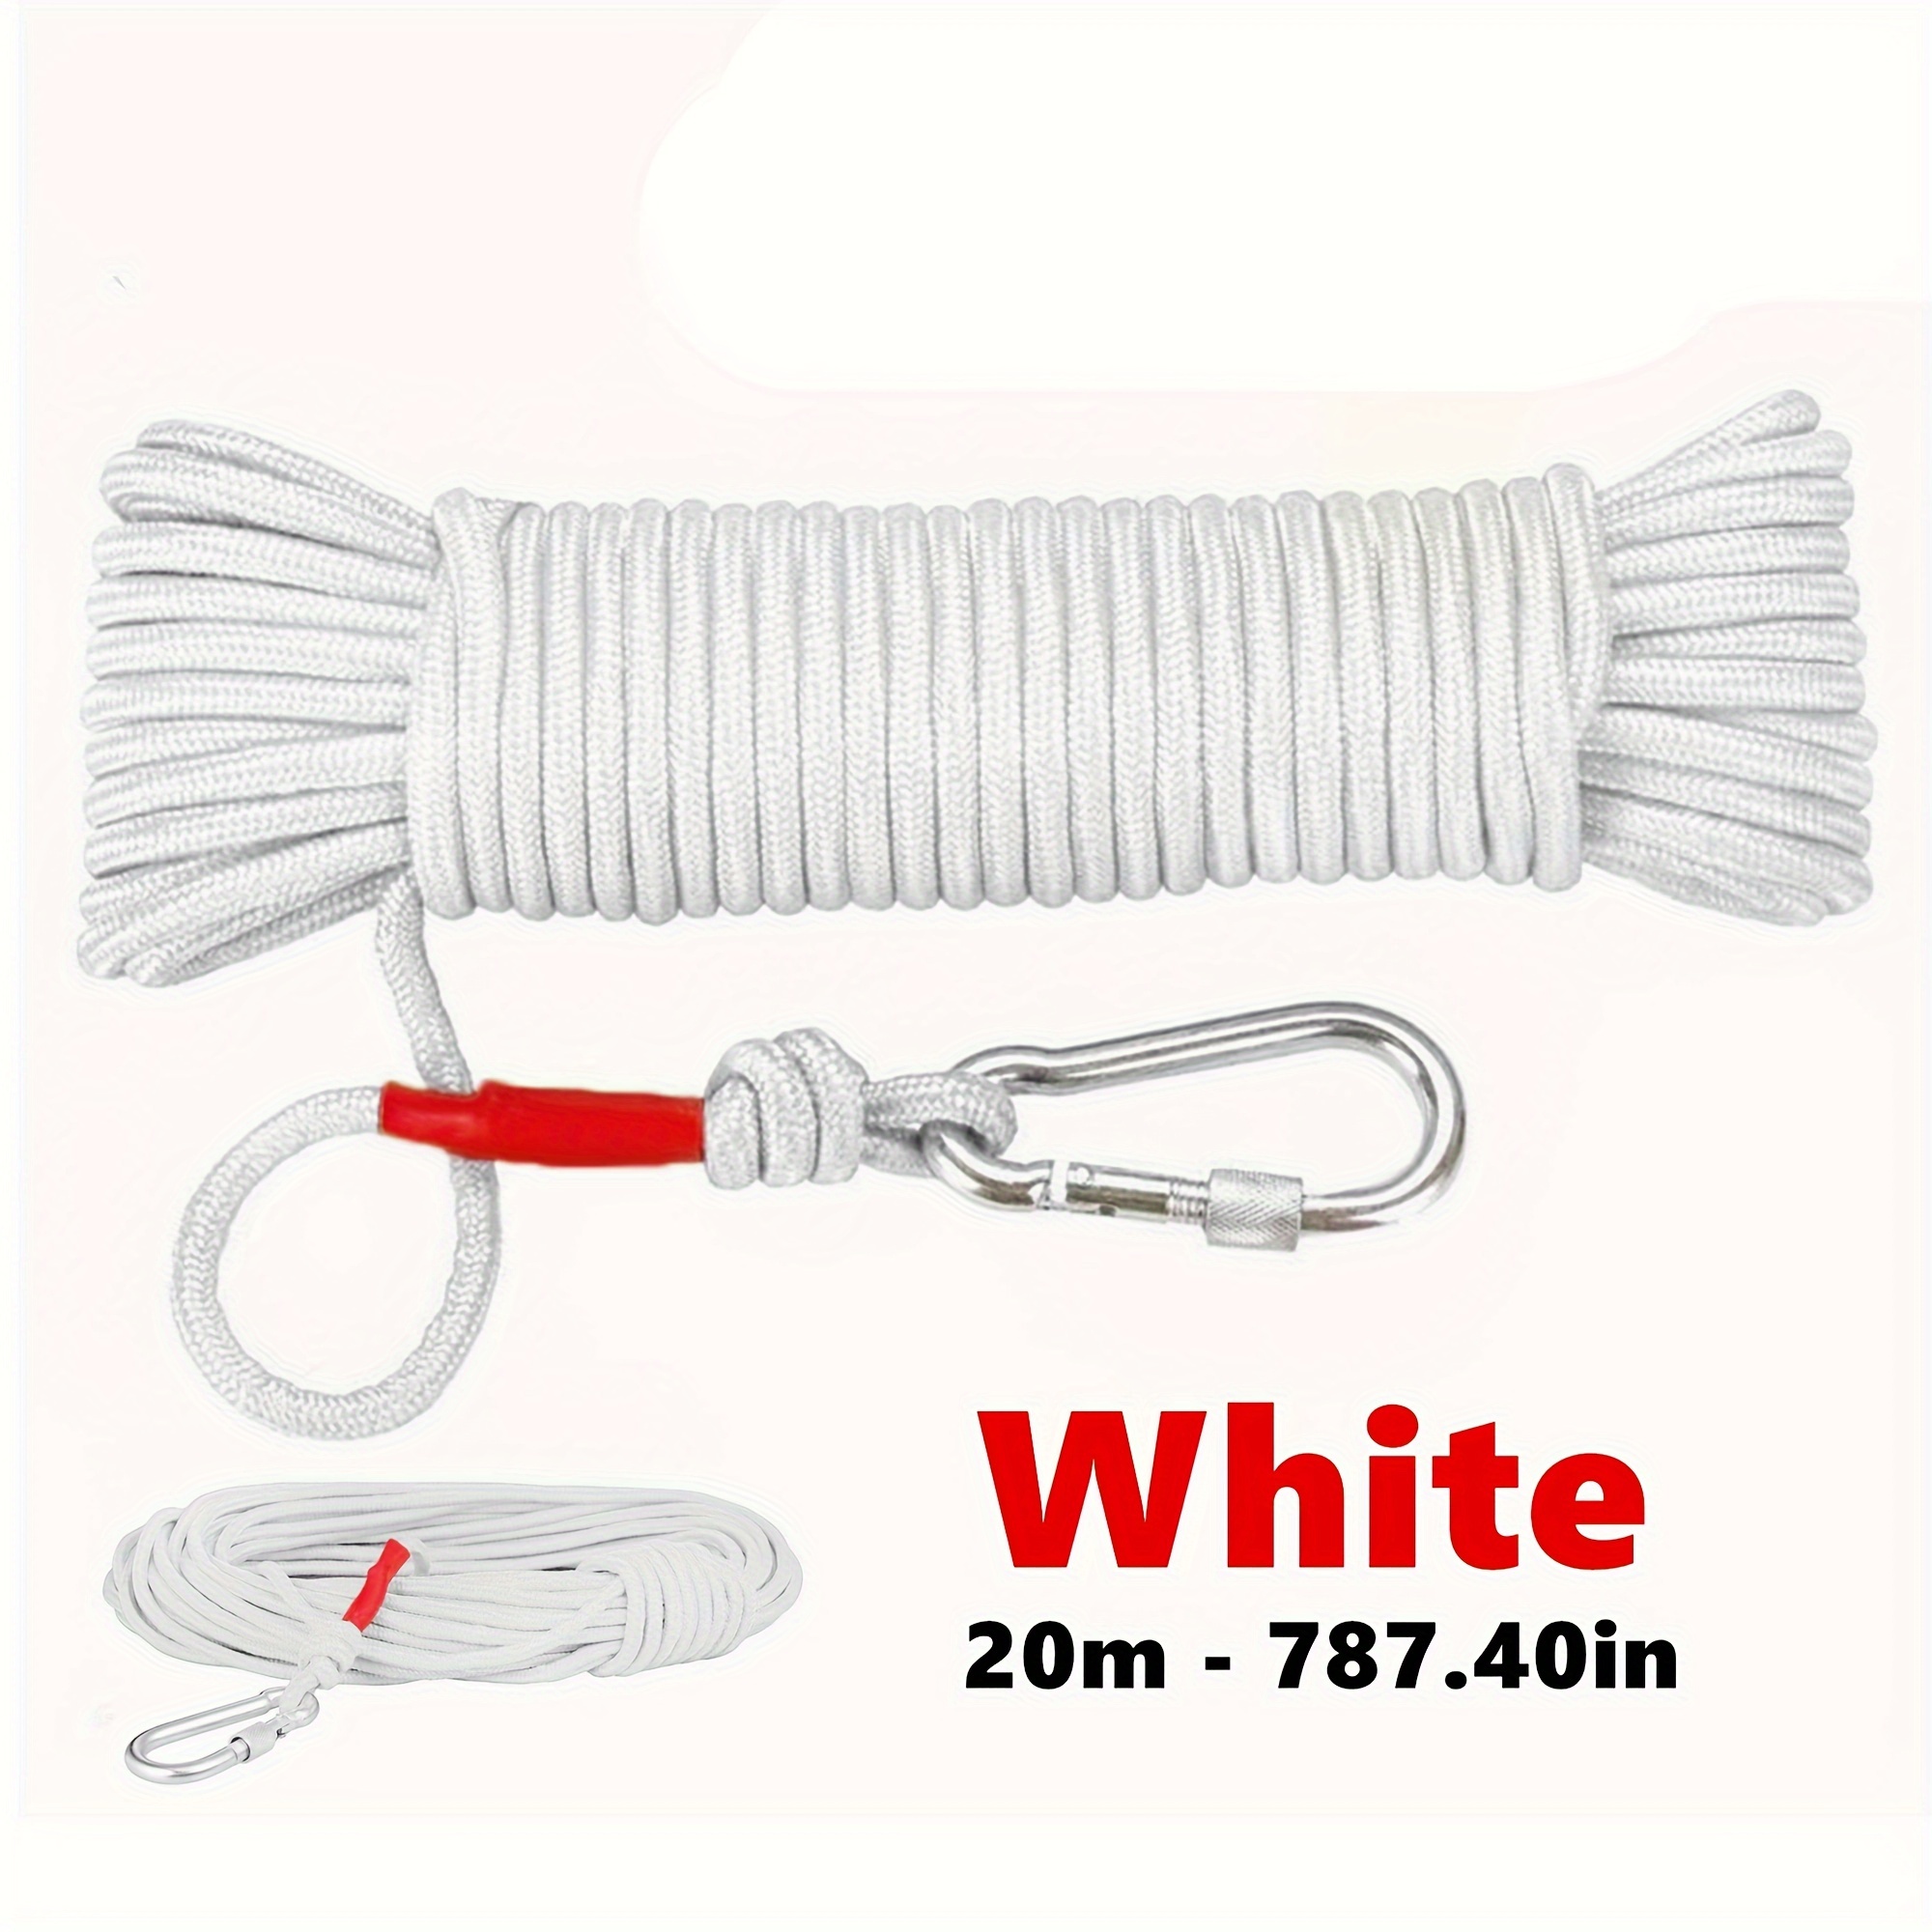 787.4in Black Salvage Magnet Fishing Rope, Carabiner Nylon Braided Rope,  Nylon Mooring Rope For Anchor, Clothesline, Belt, Tow Rope